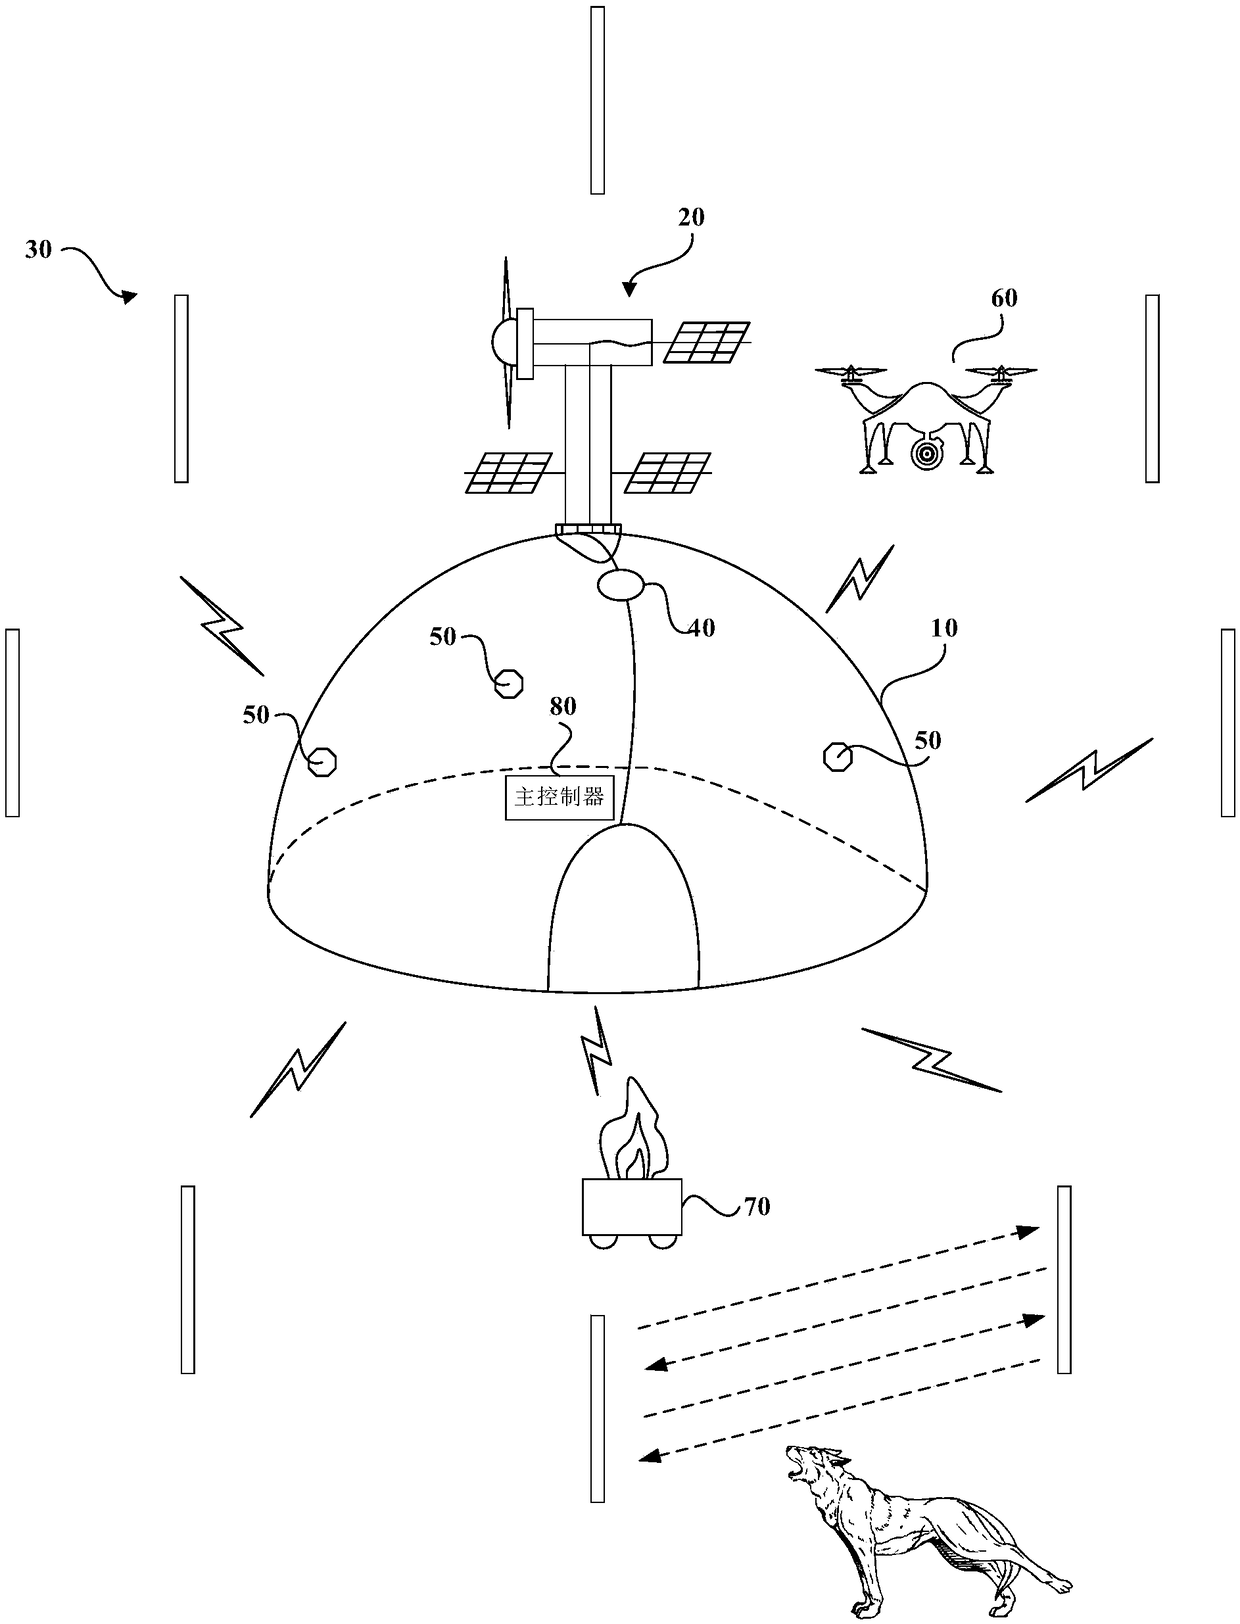 Outdoor intelligent tent system based on clean energy sources and unmanned aerial vehicle